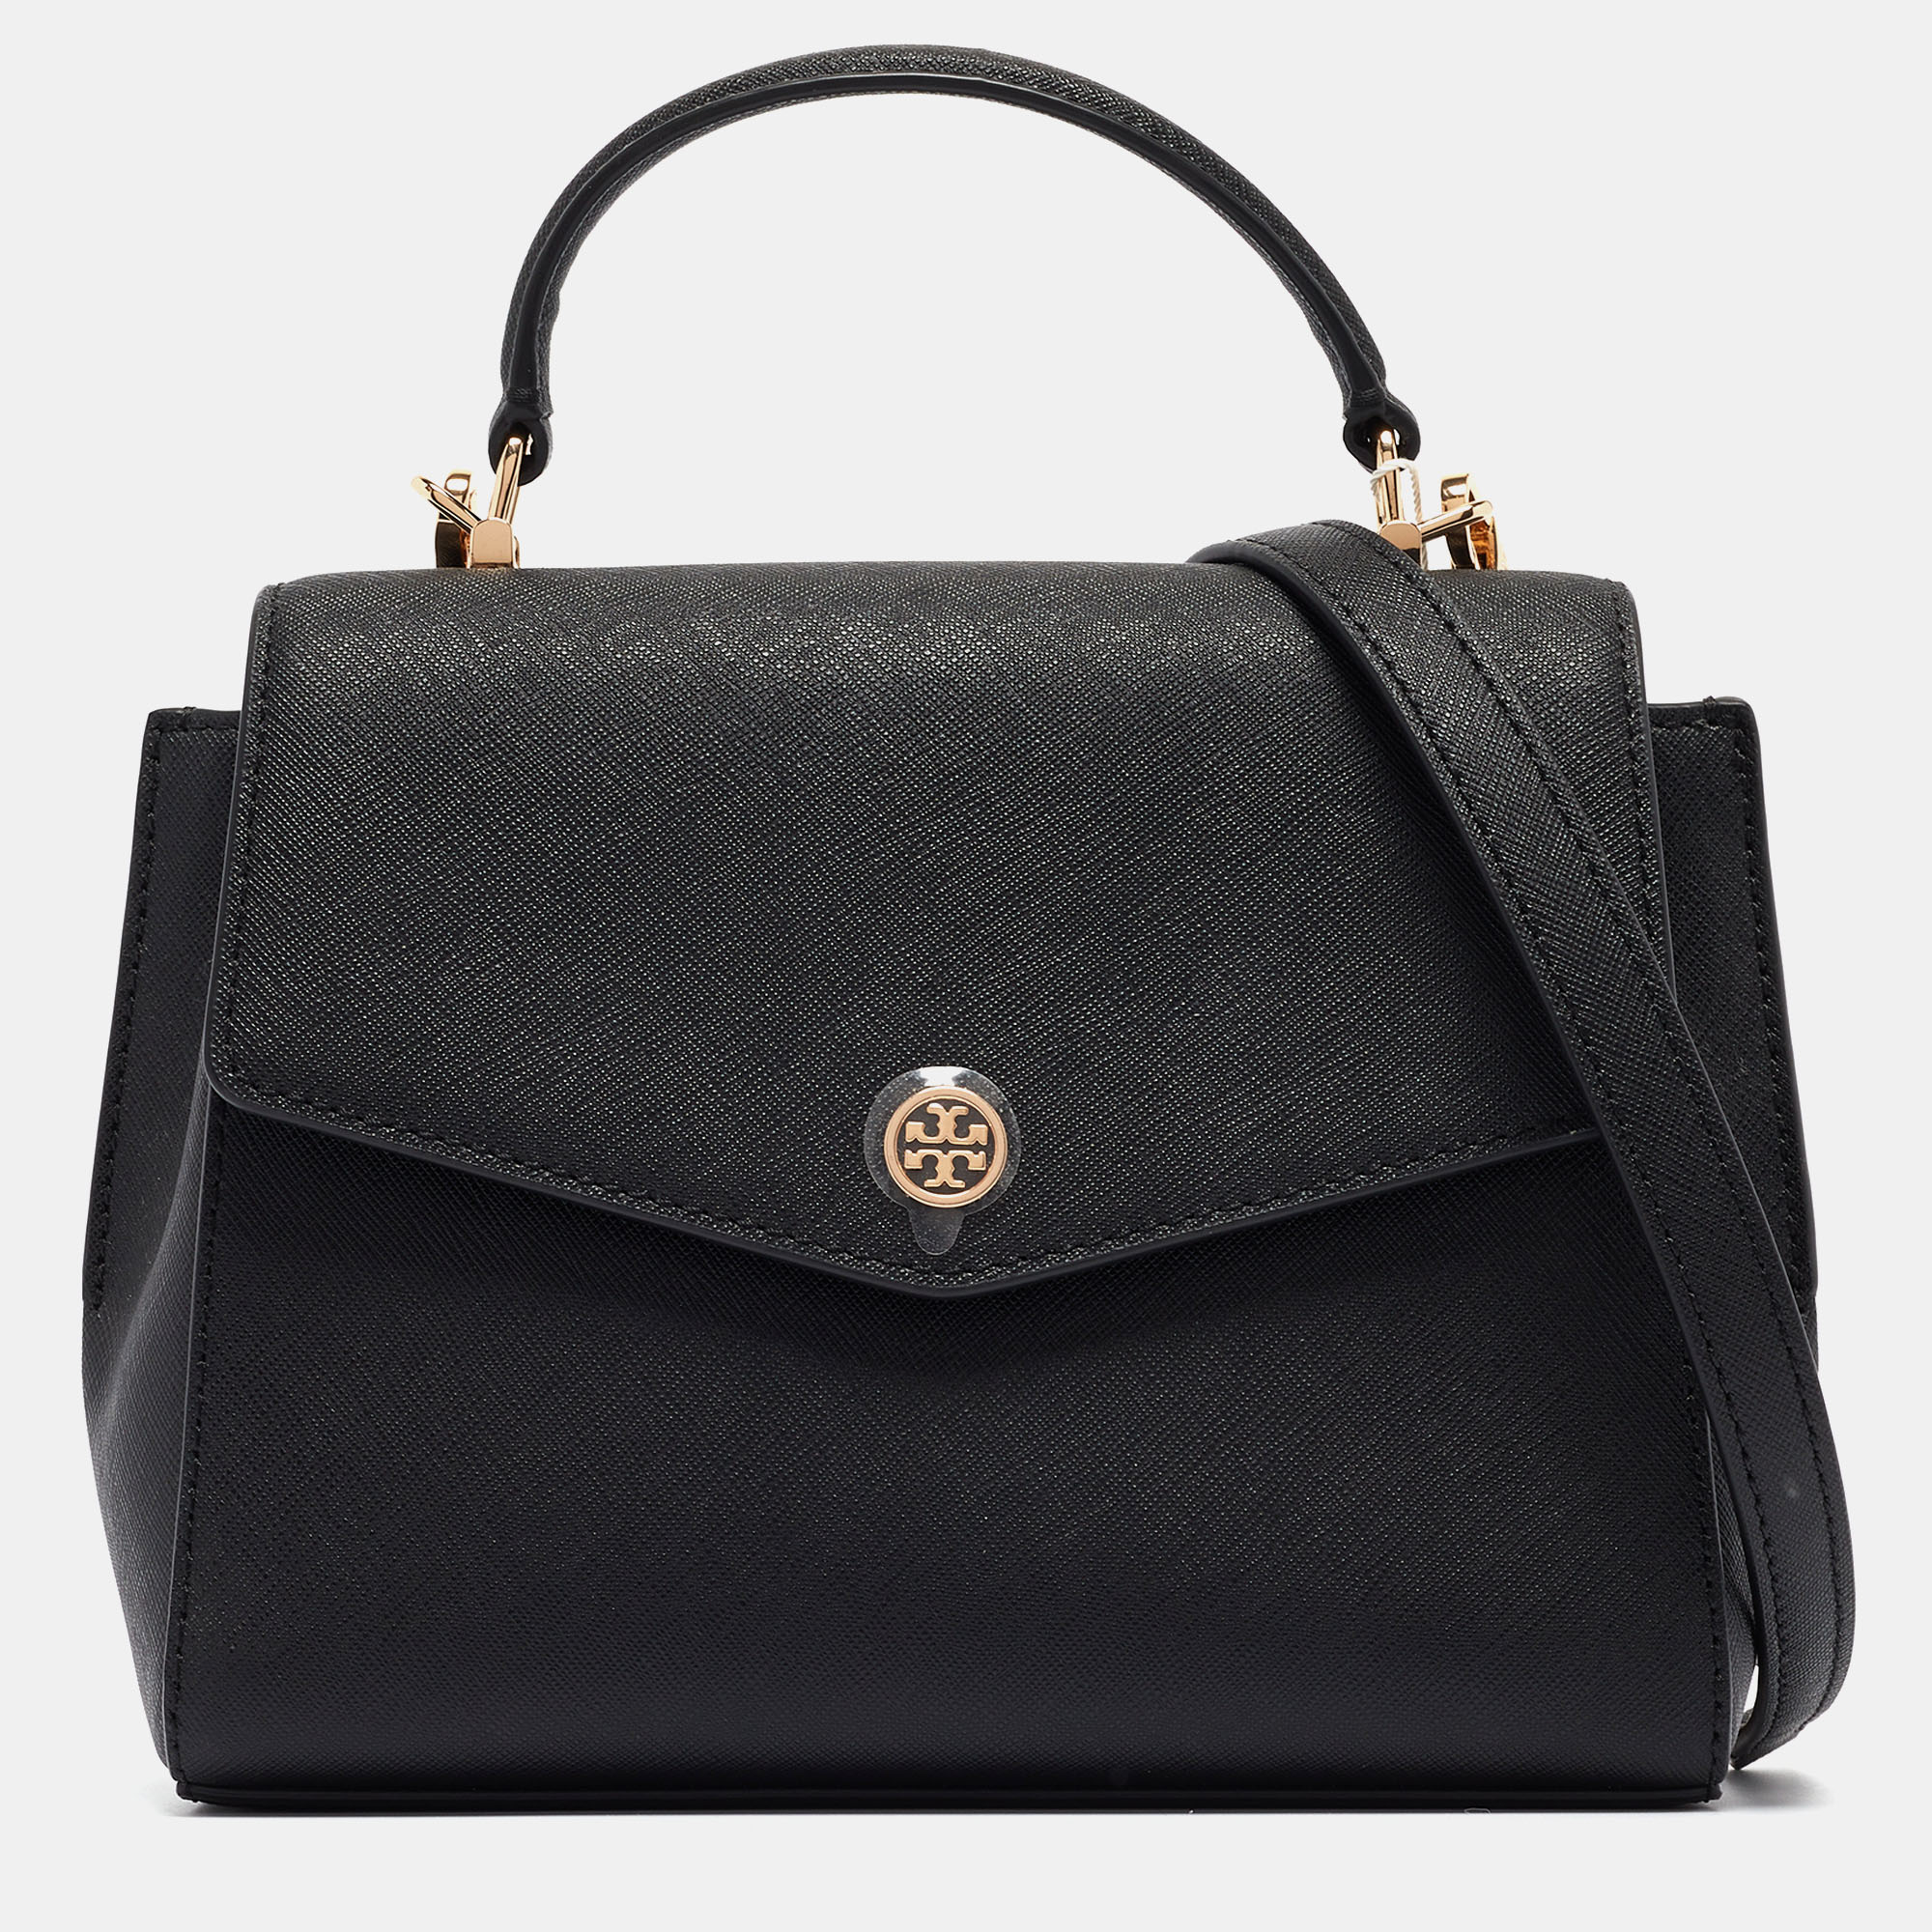 Pre-owned Tory Burch Black Leather Small Robinson Top Handle Bag